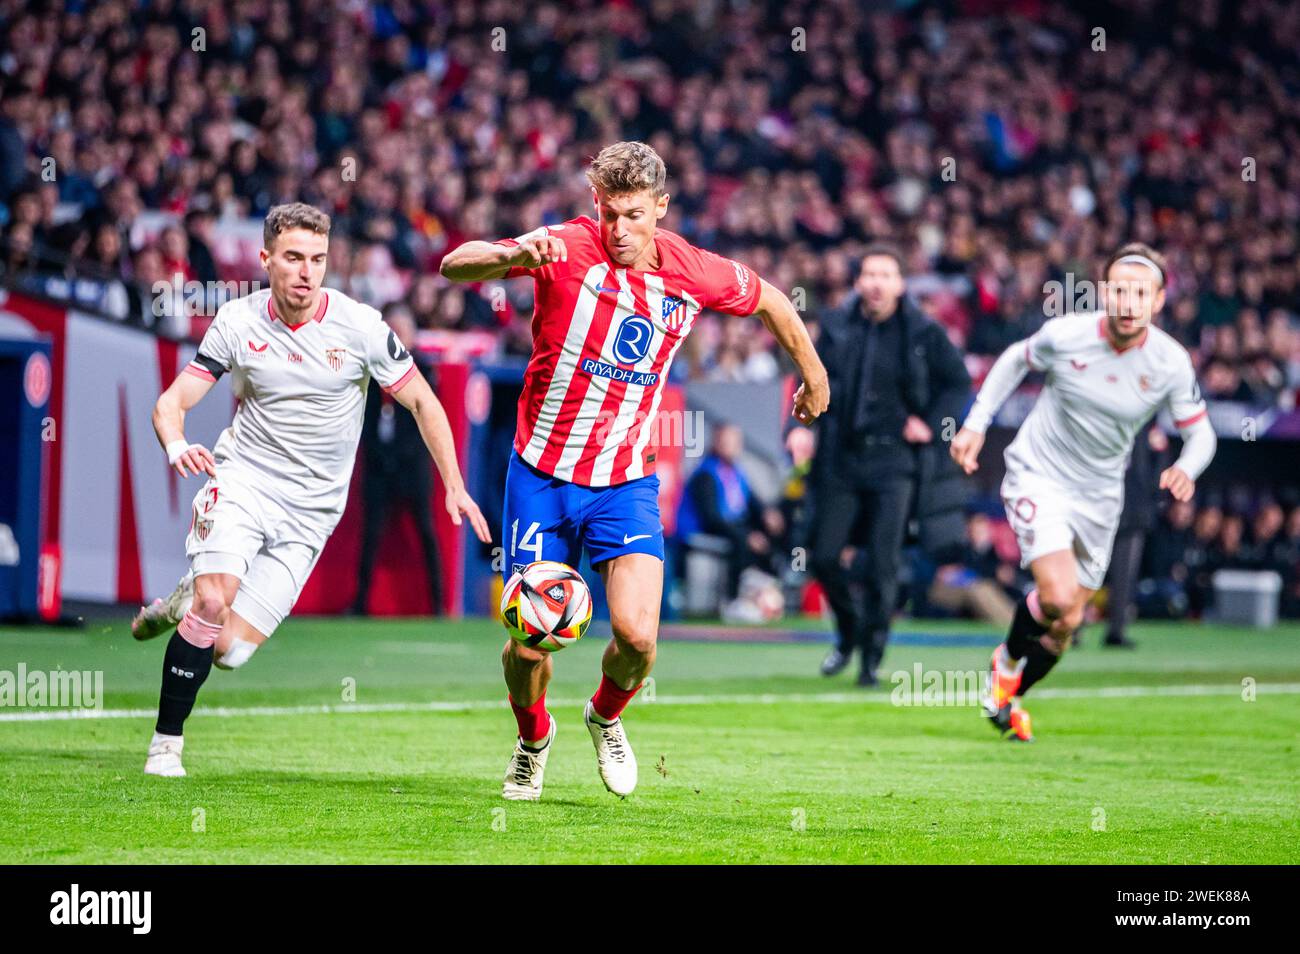 Madrid, Spain. 25th Jan, 2024. Marcos Llorente (C) of Atletico Madrid and Adria Pedrosa (L) and Ivan Rakitic (R) of Sevilla in action during the football match valid for quarter finals of the Copa del Rey tournament between Atletico Madrid and Sevilla played at Estadio Metropolitano. Atletico Madrid 1 : 0 Sevilla Credit: SOPA Images Limited/Alamy Live News Stock Photo